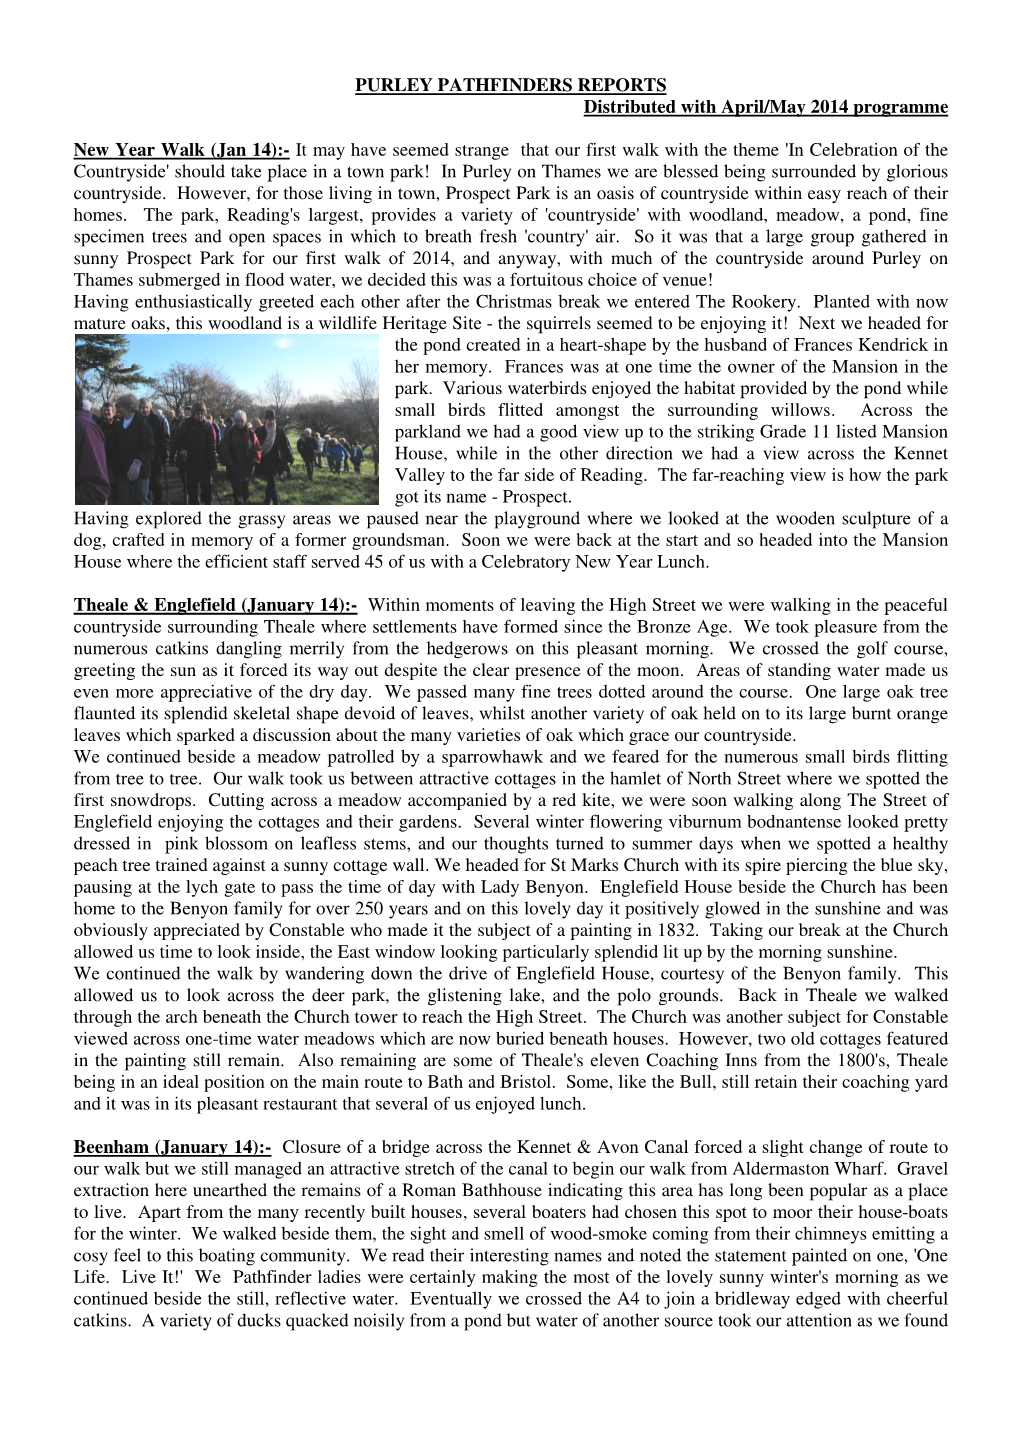 PURLEY PATHFINDERS REPORTS Distributed with April/May 2014 Programme New Year Walk (Jan 14):- It May Have Seemed Strange That O